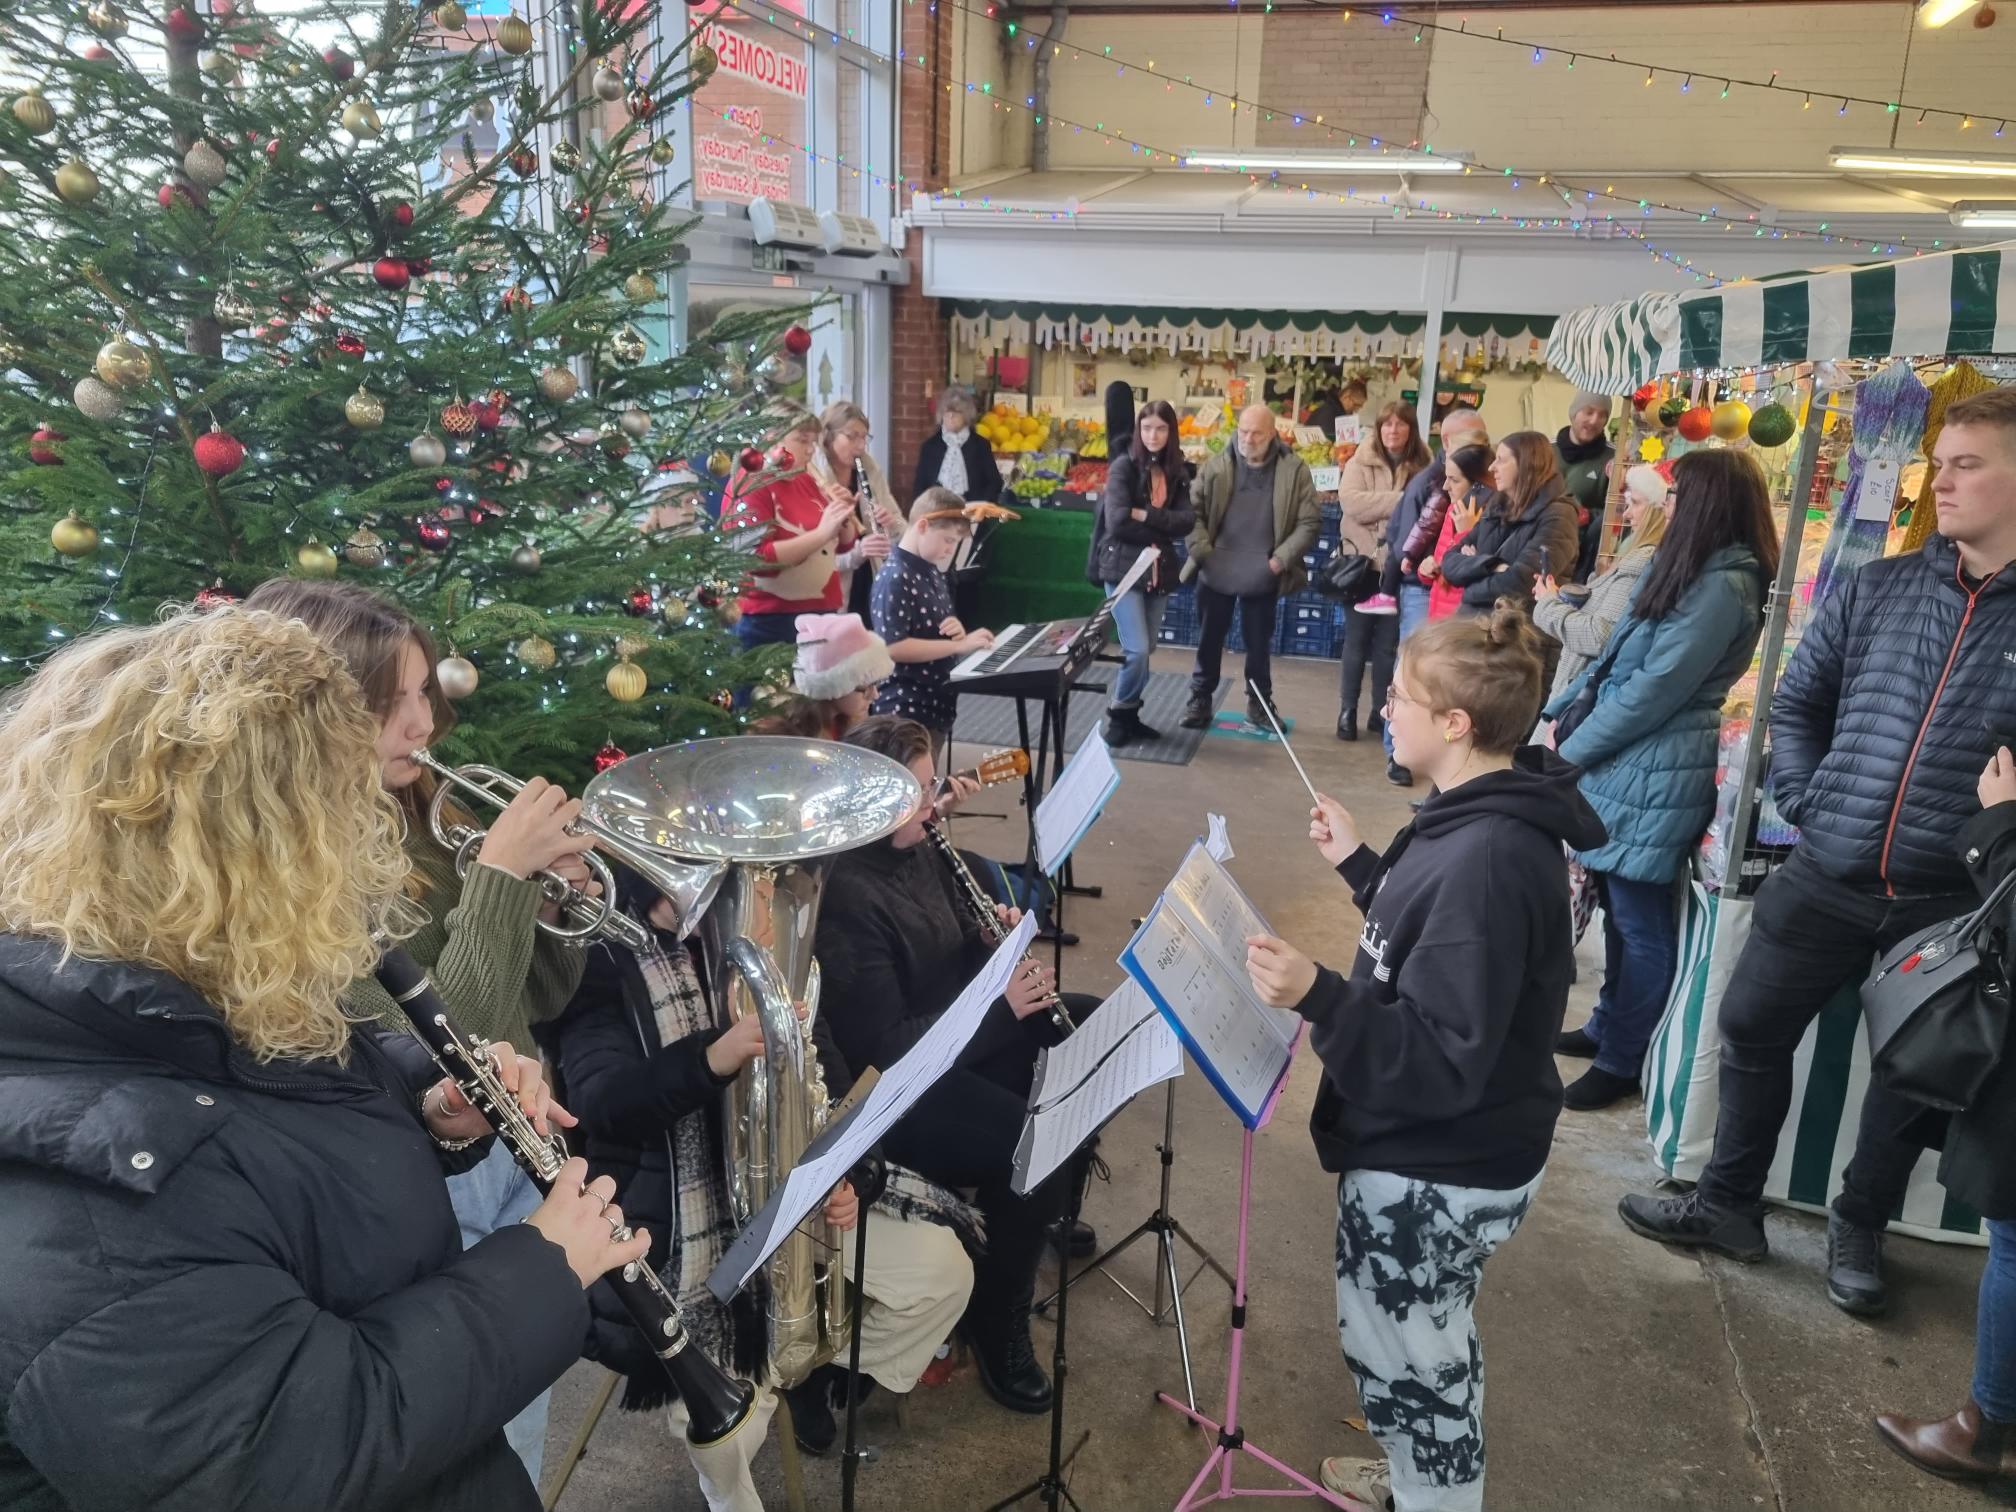 The David Nieper Academy band performing in the community at Alfreton Indoor Market